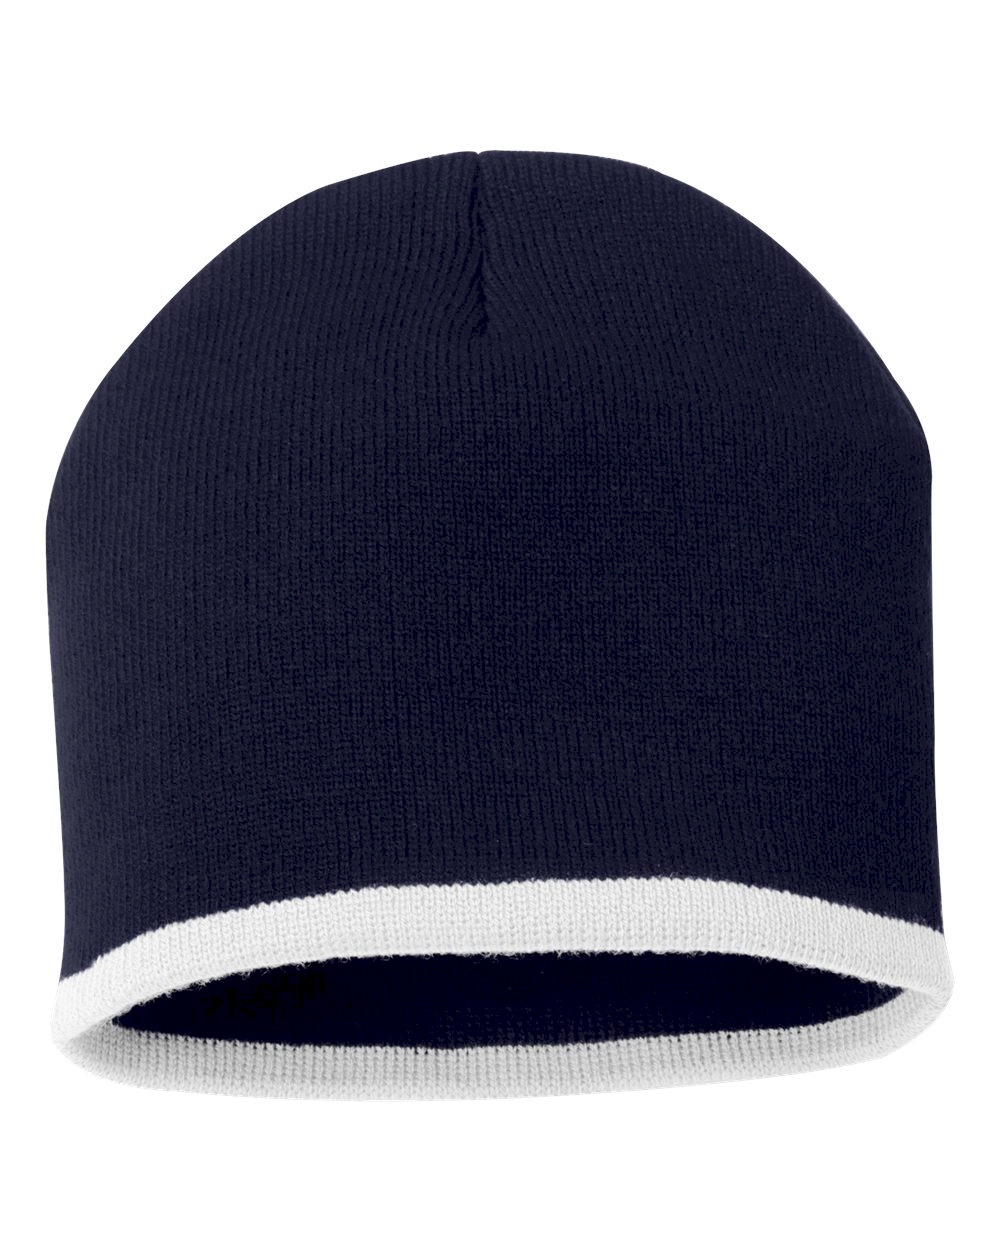 8" Knit Beanie with Striped Bottom Embroidery Blanks - NAVY/WHITE